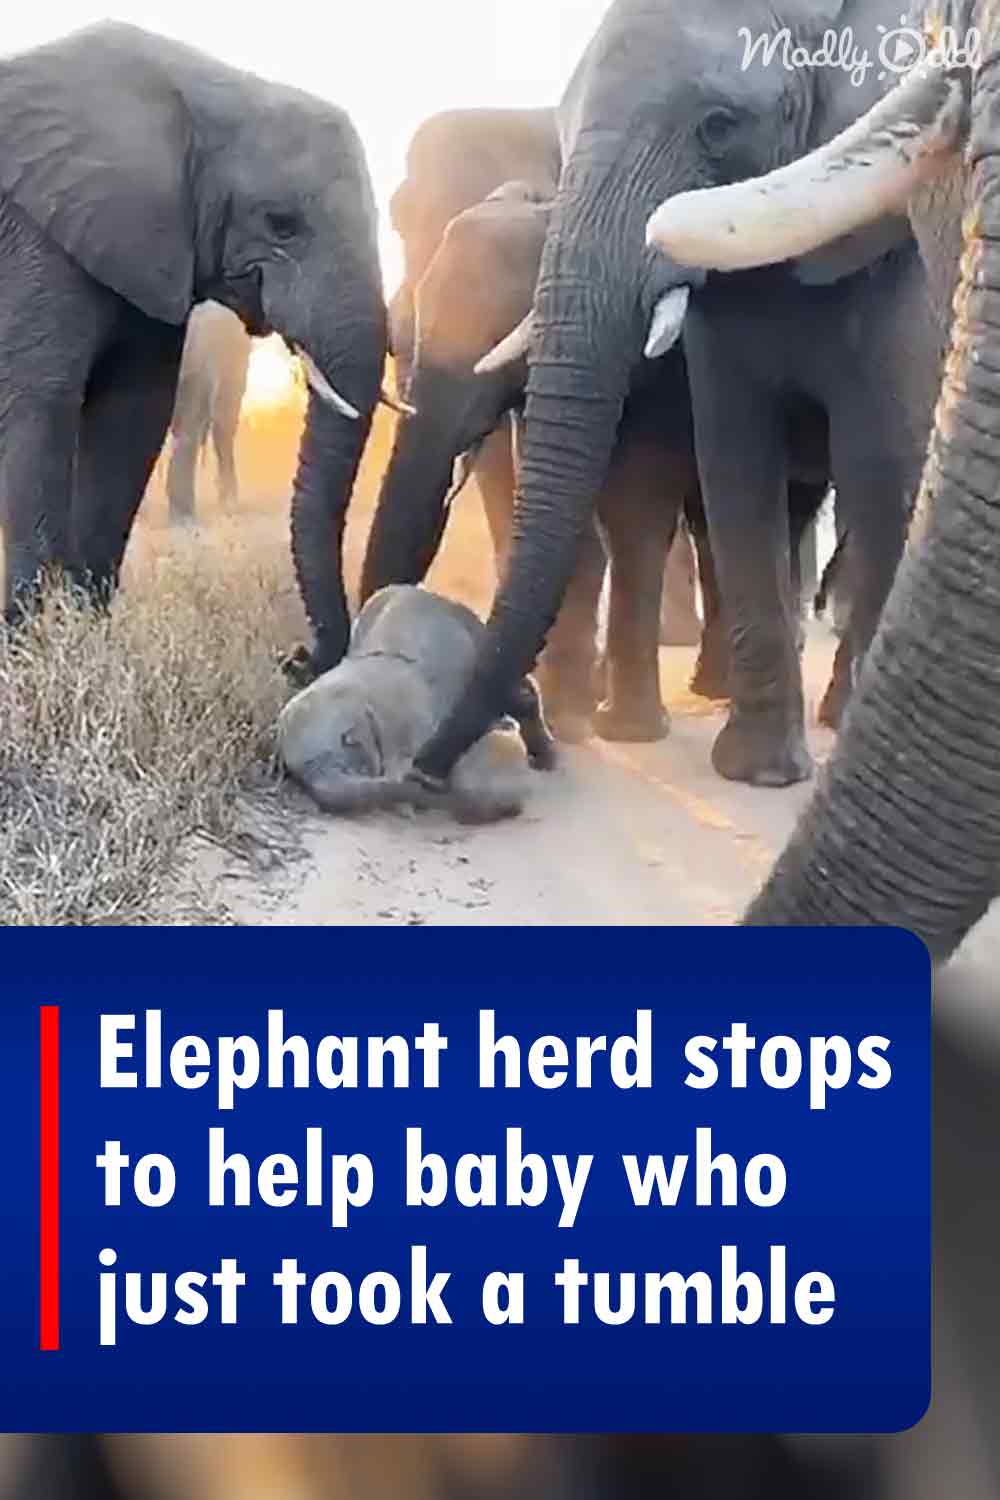 Elephant herd stops to help baby who just took a tumble